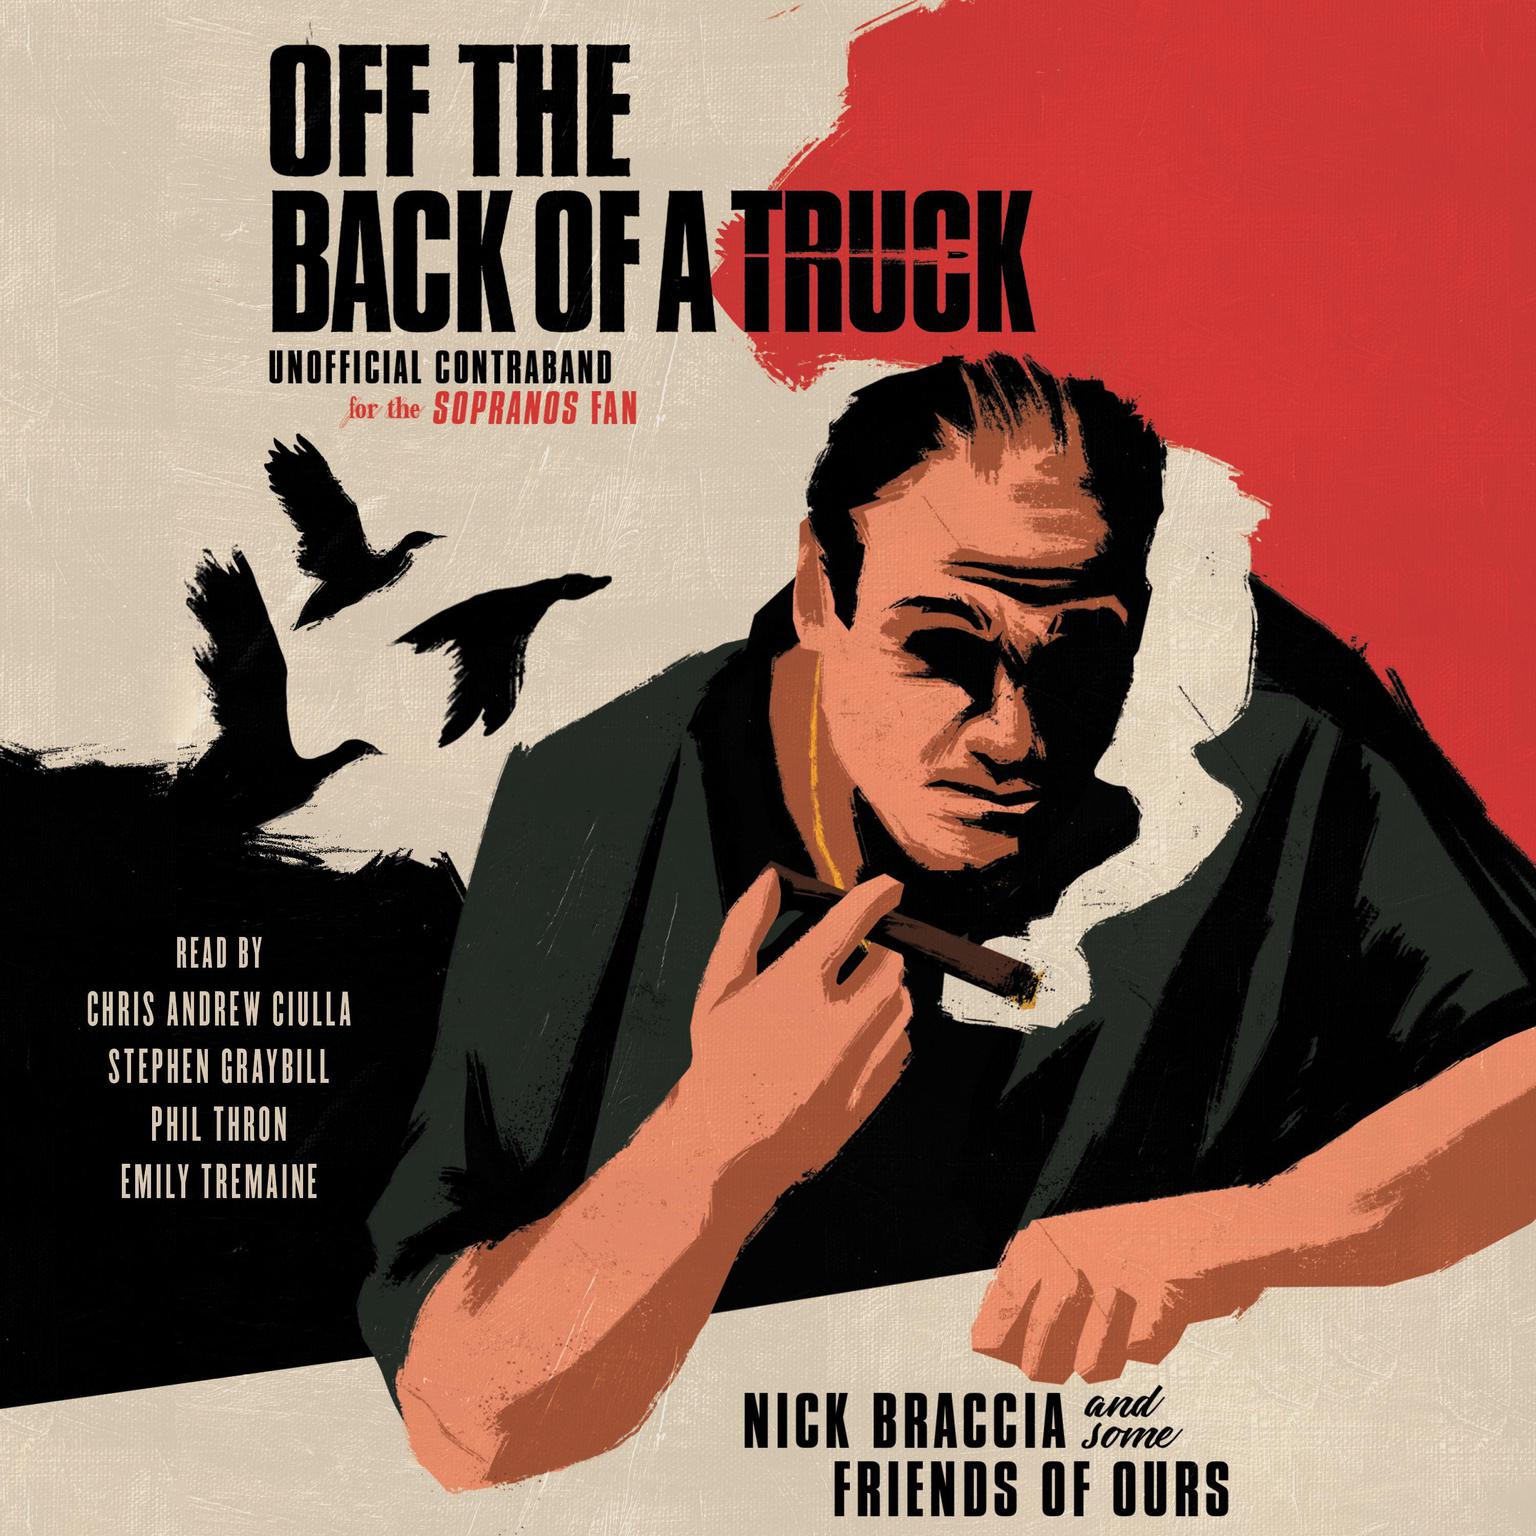 Off the Back of a Truck: Unofficial Contraband for the Sopranos Fan Audiobook, by Nick Braccia